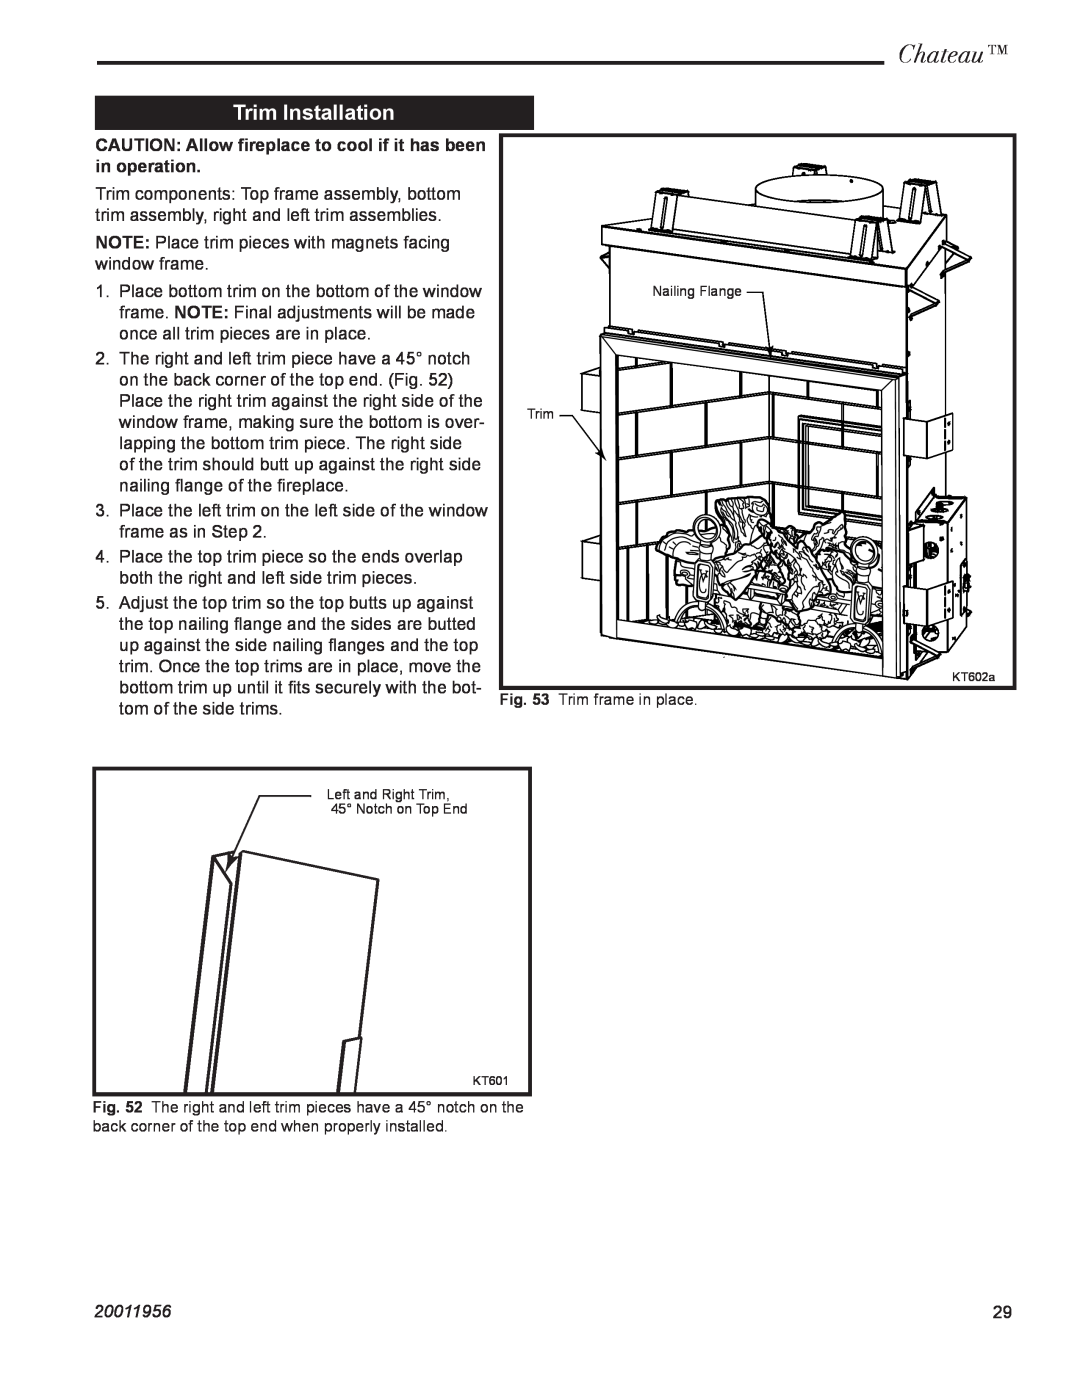 Vermont Casting DVT44 installation instructions Trim Installation, Chateau, 20011956, Trim frame in place 